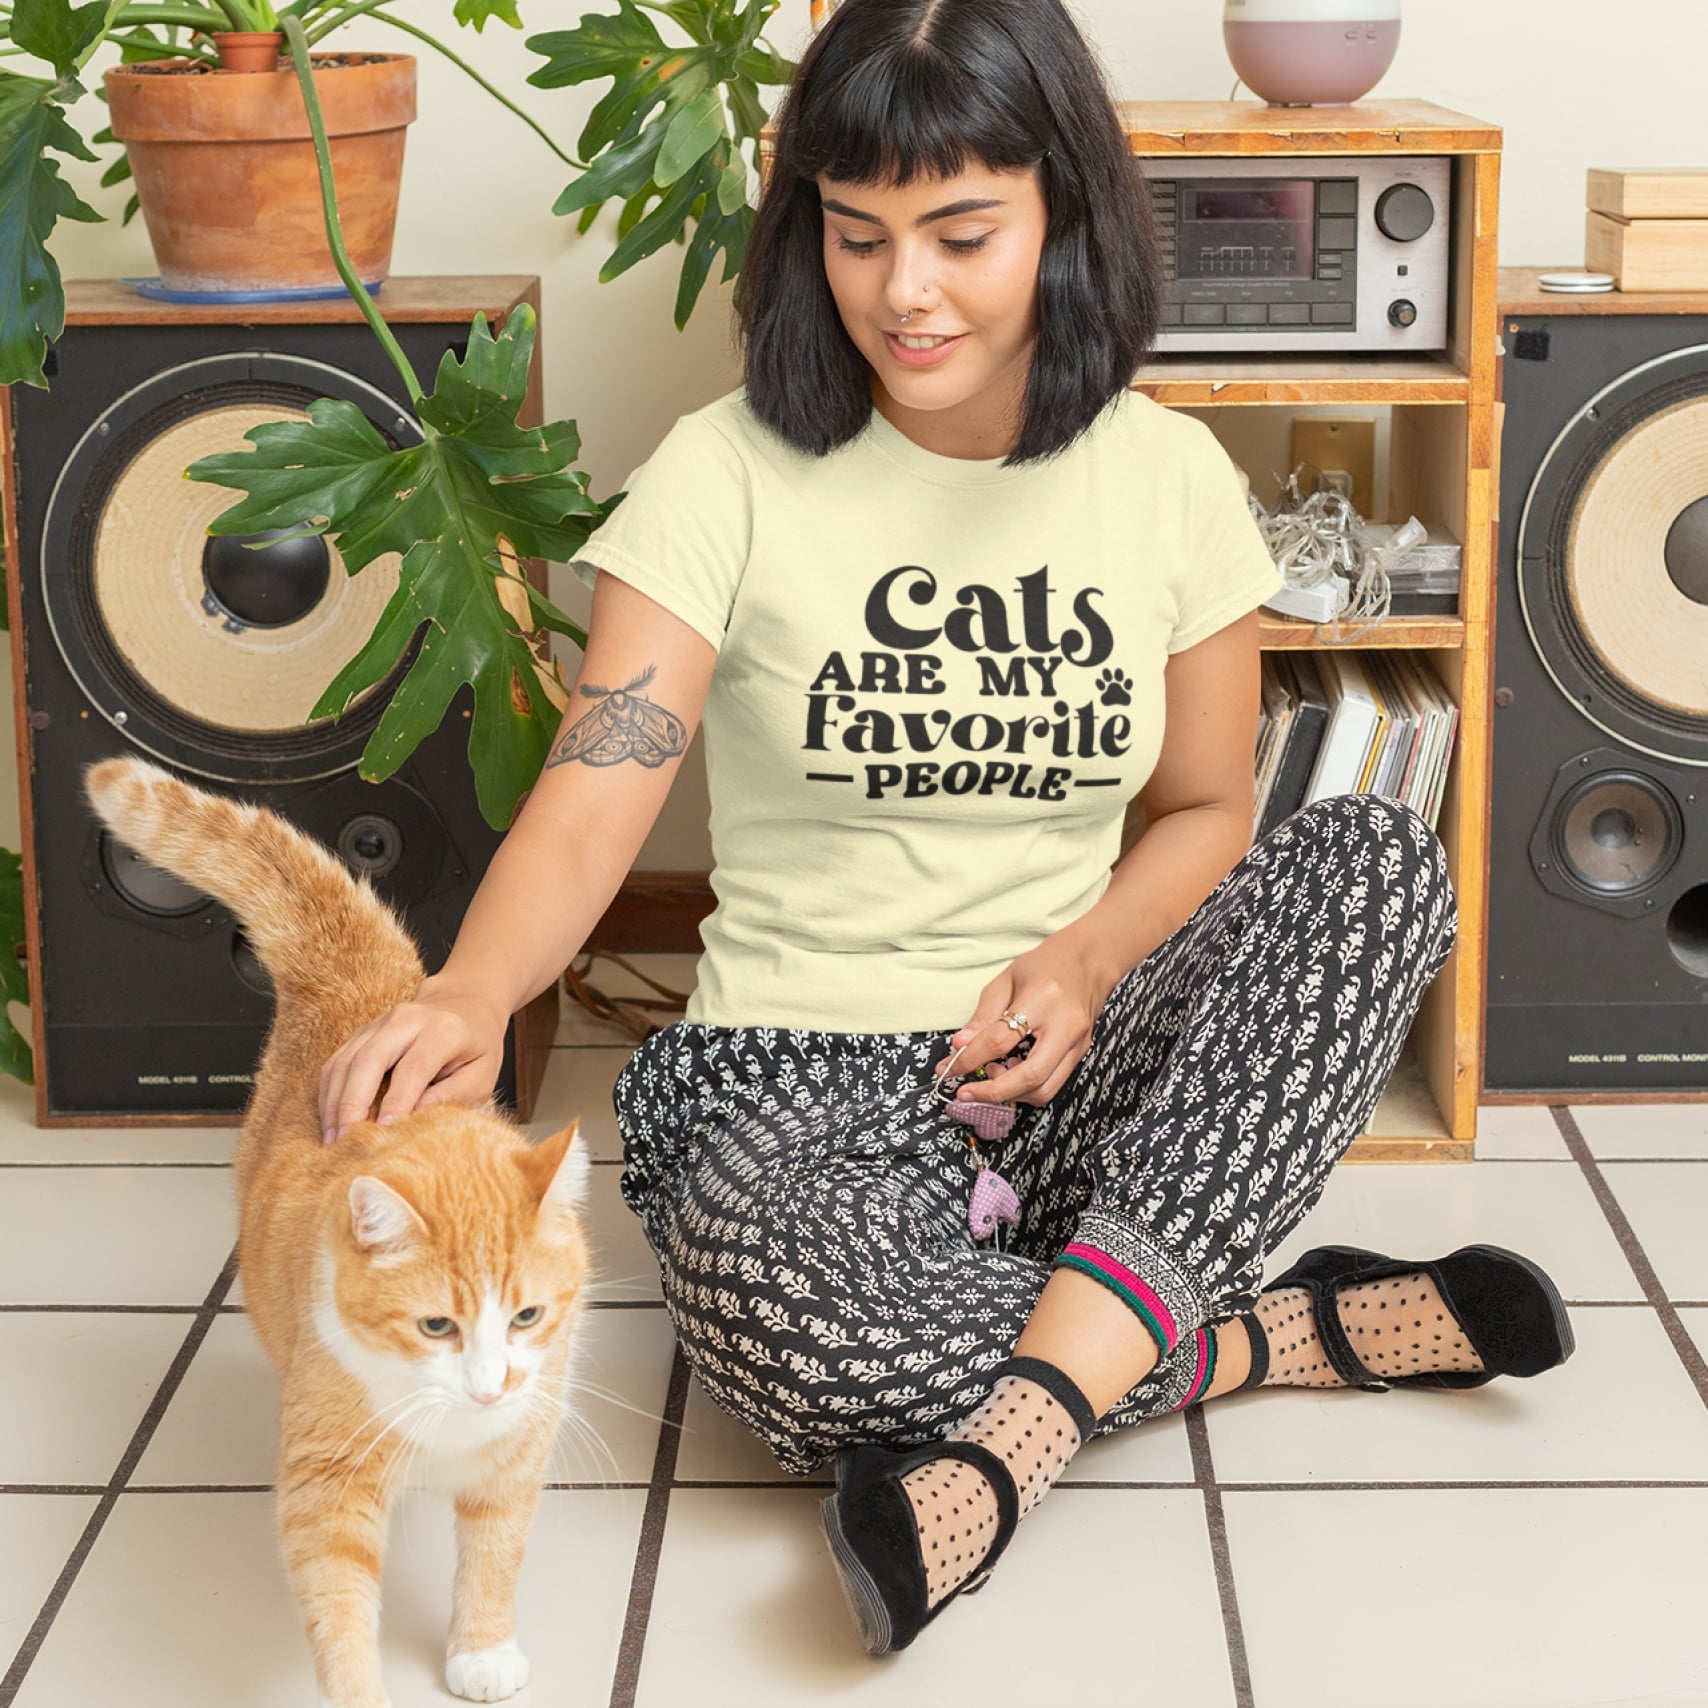 A woman petting a cat while wearing a custom “Cats Are My Favorite People” t-shirt.